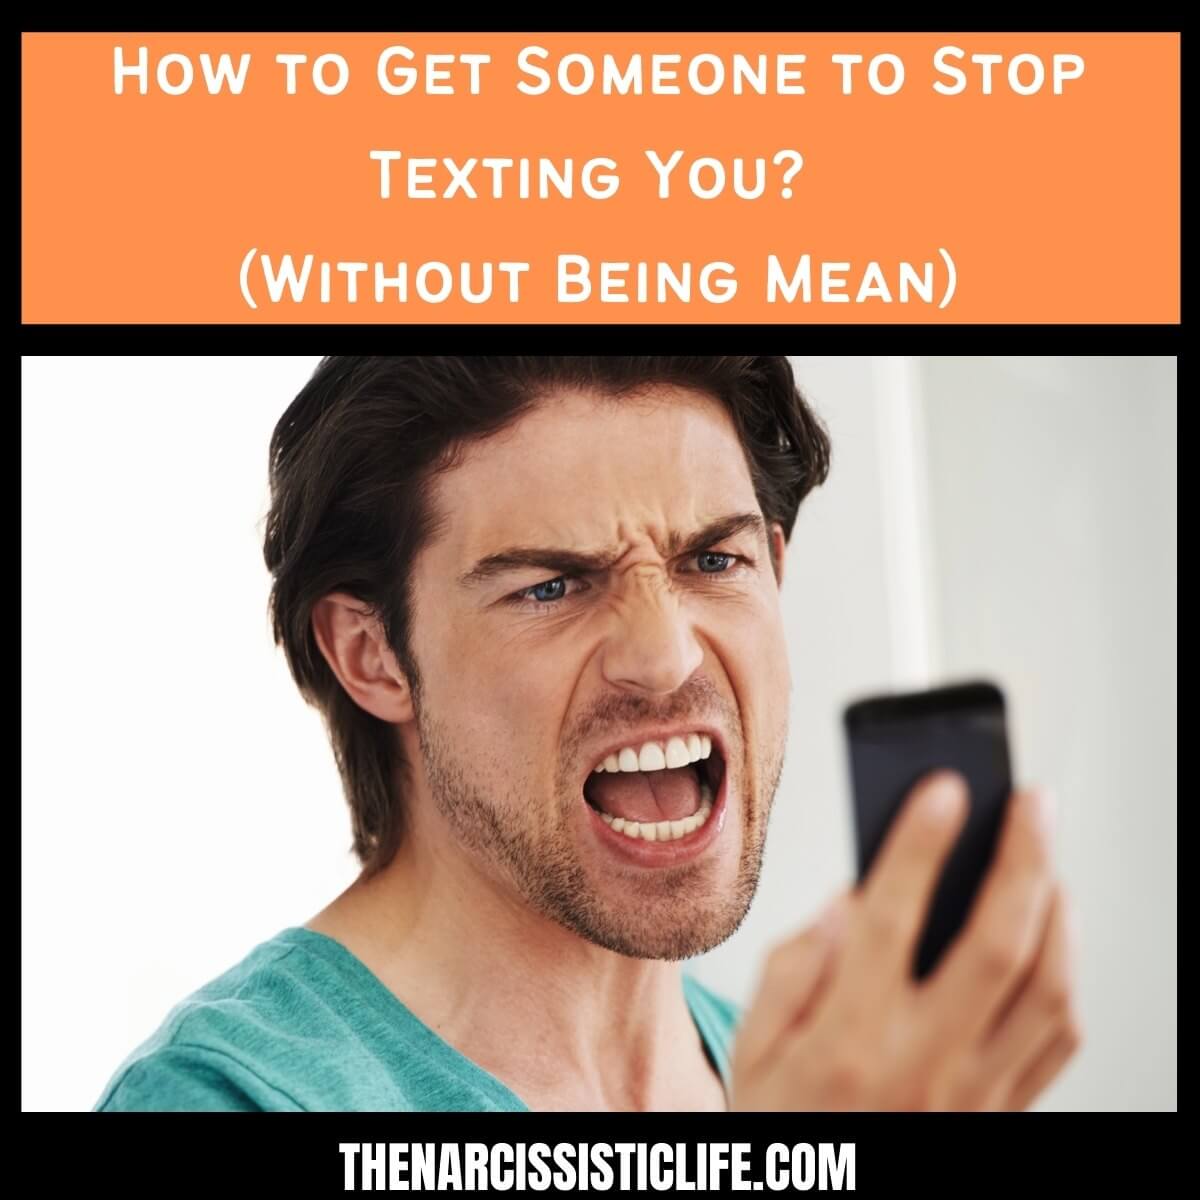 How to Get Someone to Stop Texting You?